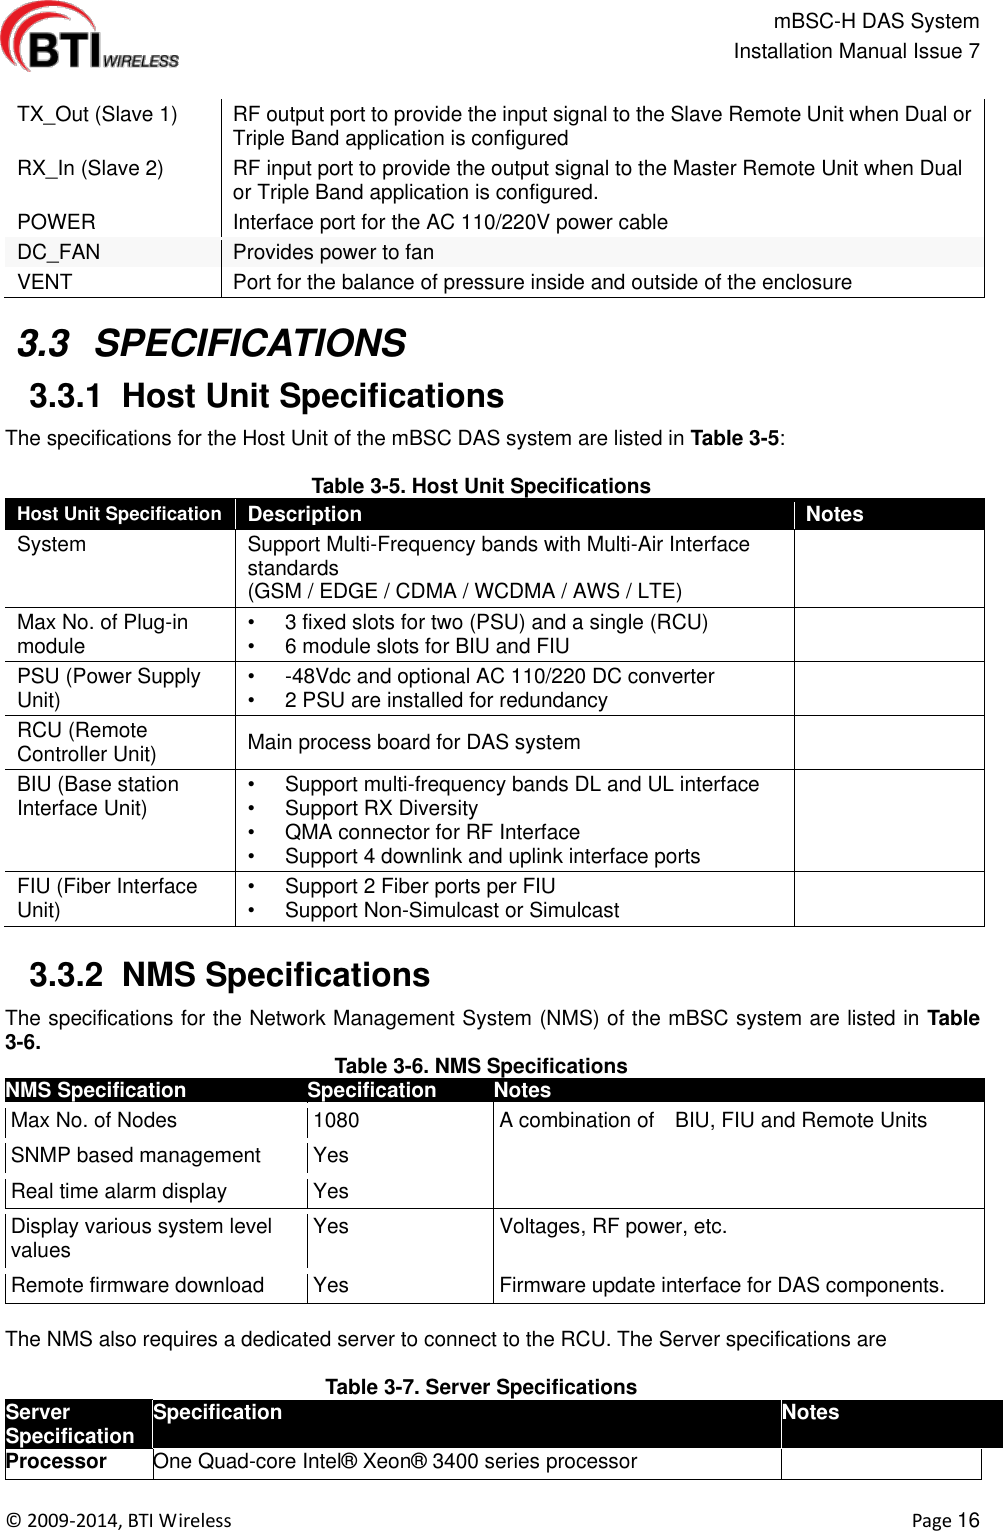                                                   mBSC-H DAS System   Installation Manual Issue 7  ©  2009-2014, BTI Wireless    Page 16  TX_Out (Slave 1) RF output port to provide the input signal to the Slave Remote Unit when Dual or Triple Band application is configured RX_In (Slave 2) RF input port to provide the output signal to the Master Remote Unit when Dual or Triple Band application is configured. POWER Interface port for the AC 110/220V power cable DC_FAN Provides power to fan VENT Port for the balance of pressure inside and outside of the enclosure   3.3  SPECIFICATIONS  3.3.1  Host Unit Specifications The specifications for the Host Unit of the mBSC DAS system are listed in Table 3-5:  Table 3-5. Host Unit Specifications Host Unit Specification Description Notes System Support Multi-Frequency bands with Multi-Air Interface standards (GSM / EDGE / CDMA / WCDMA / AWS / LTE)    Max No. of Plug-in module •  3 fixed slots for two (PSU) and a single (RCU) •  6 module slots for BIU and FIU  PSU (Power Supply Unit) •  -48Vdc and optional AC 110/220 DC converter •  2 PSU are installed for redundancy  RCU (Remote Controller Unit) Main process board for DAS system  BIU (Base station Interface Unit) •  Support multi-frequency bands DL and UL interface •  Support RX Diversity •  QMA connector for RF Interface •  Support 4 downlink and uplink interface ports  FIU (Fiber Interface Unit) •  Support 2 Fiber ports per FIU •  Support Non-Simulcast or Simulcast    3.3.2  NMS Specifications   The specifications for the Network Management System (NMS) of the mBSC system are listed in Table 3-6. Table 3-6. NMS Specifications NMS Specification   Specification Notes Max No. of Nodes 1080 A combination of    BIU, FIU and Remote Units SNMP based management Yes  Real time alarm display Yes  Display various system level values Yes Voltages, RF power, etc. Remote firmware download Yes Firmware update interface for DAS components.  The NMS also requires a dedicated server to connect to the RCU. The Server specifications are  Table 3-7. Server Specifications Server Specification Specification Notes Processor One Quad-core Intel®  Xeon®  3400 series processor       